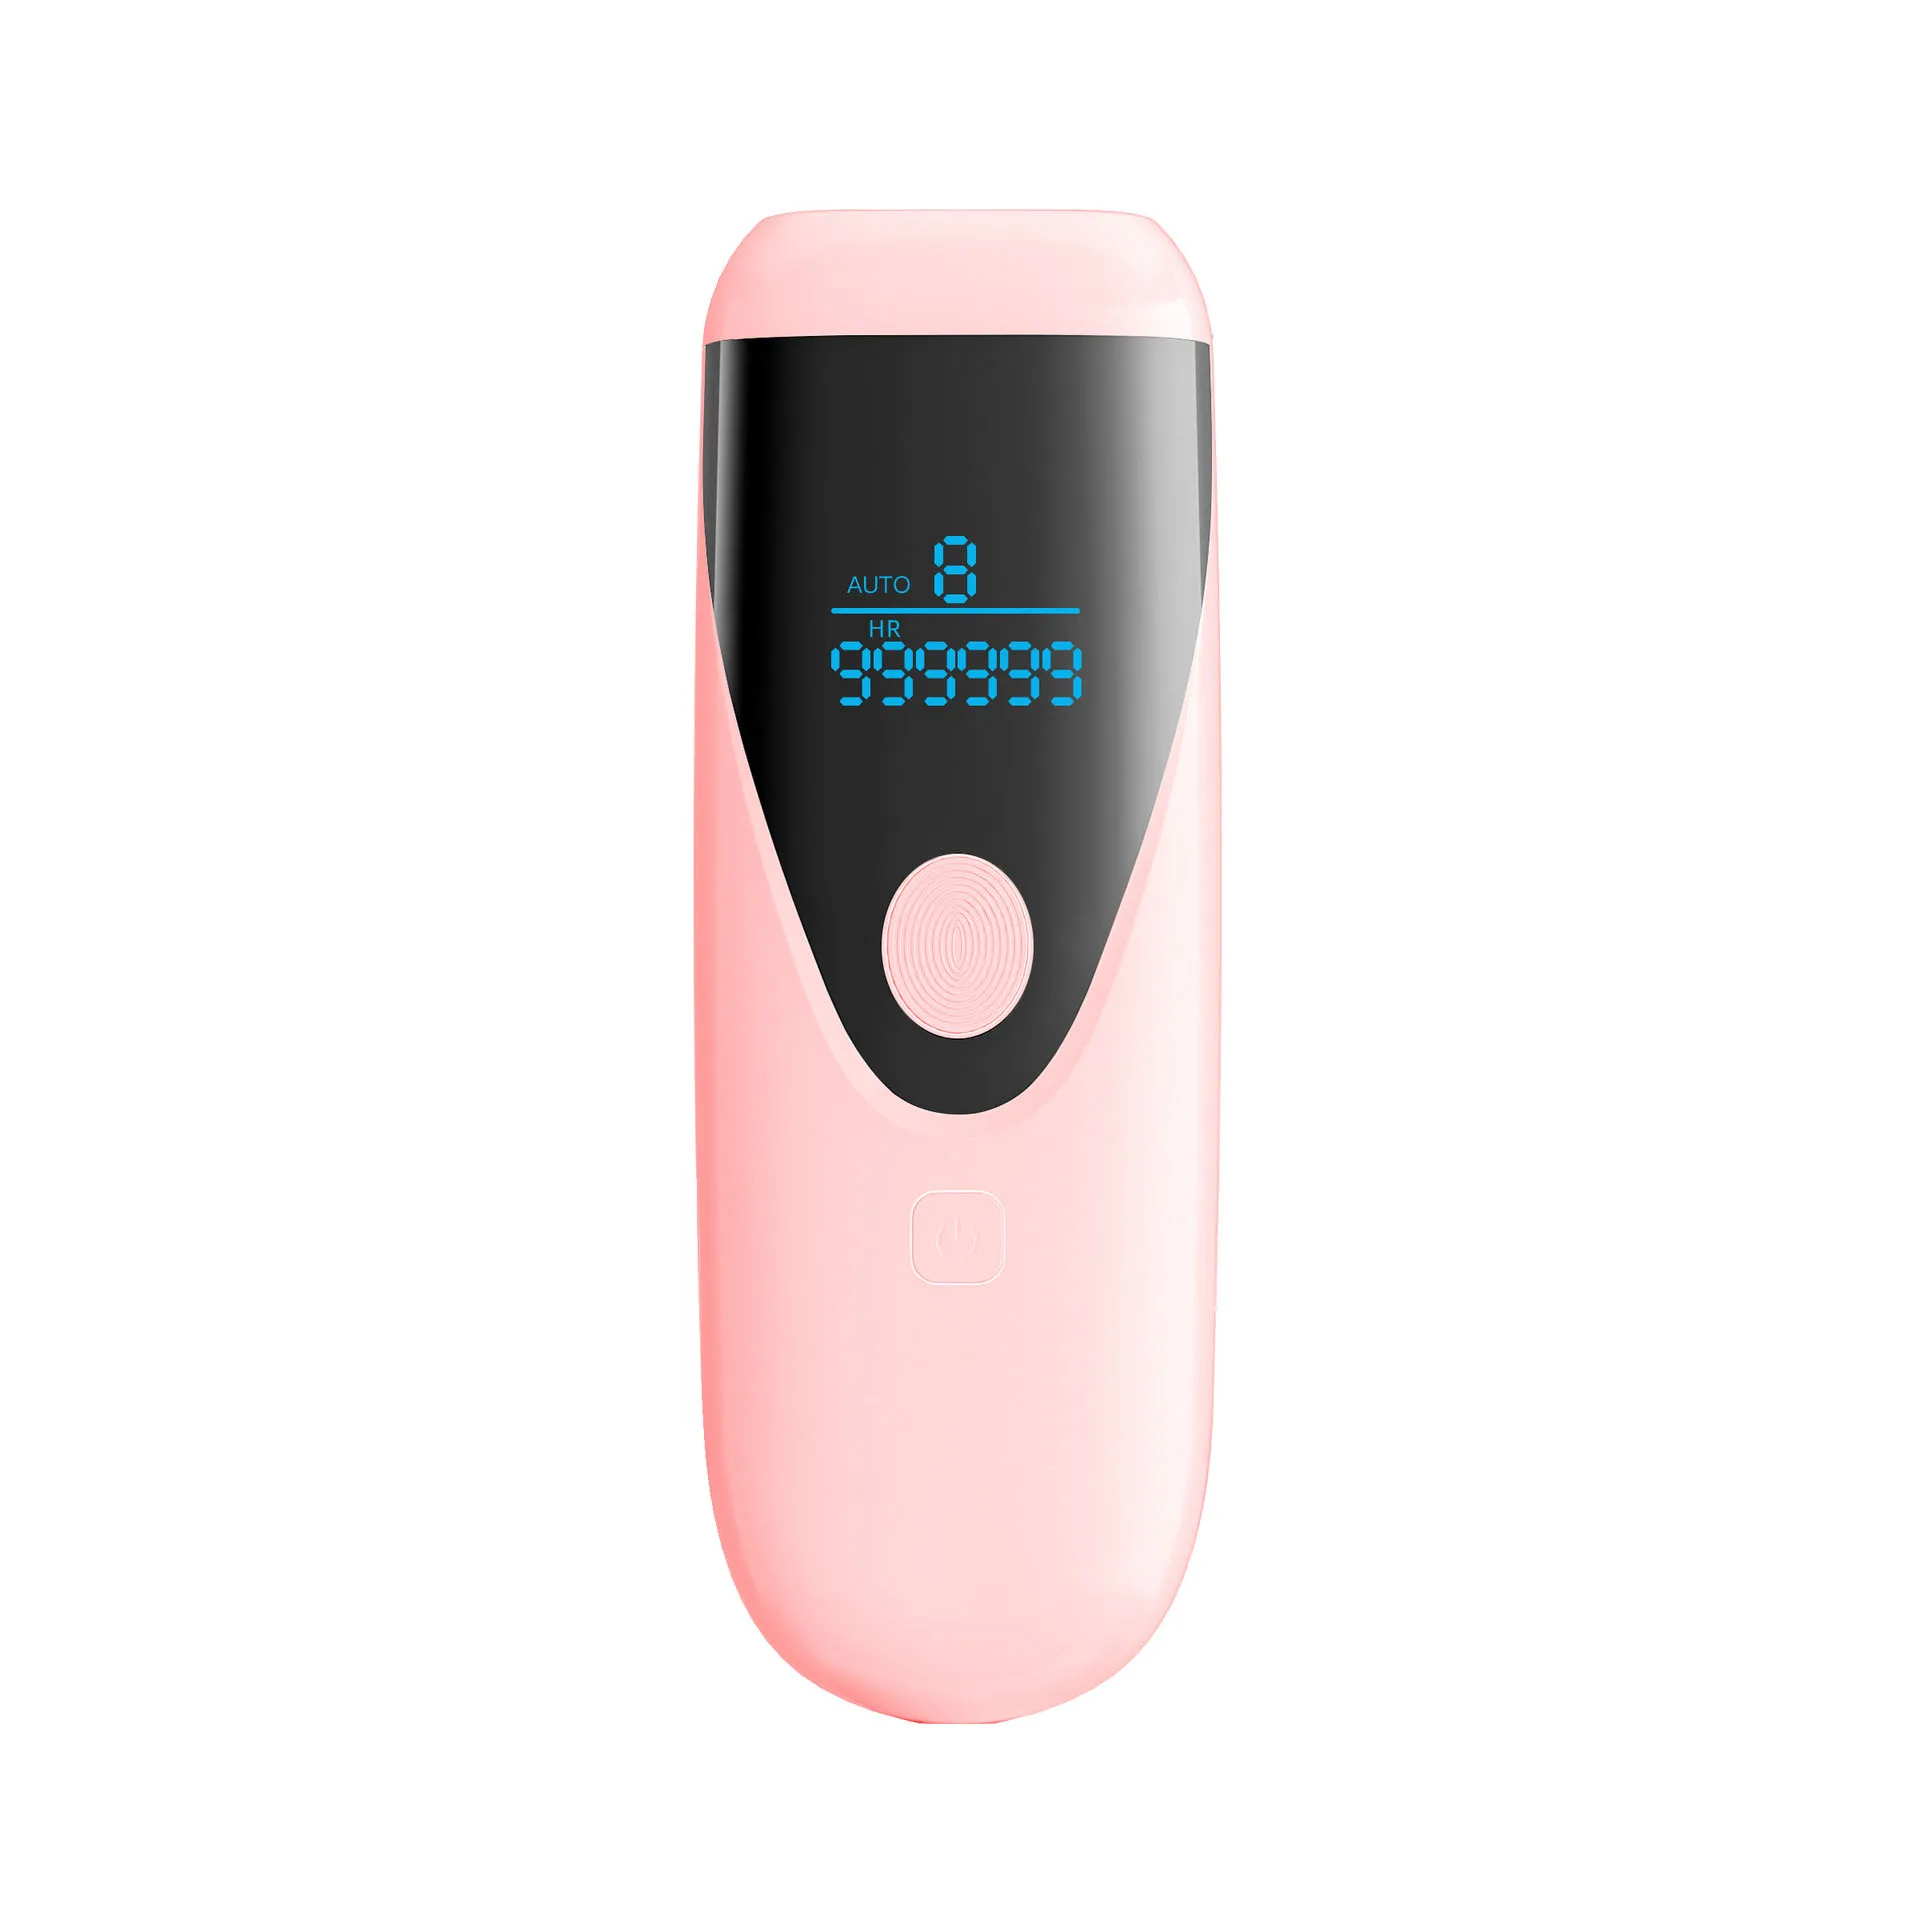 999999 Flashes Electric IPL Hair Removal Laser For Women Pulsed Light Depilator With Led Display Maquina De Cortar Cabello enlarge